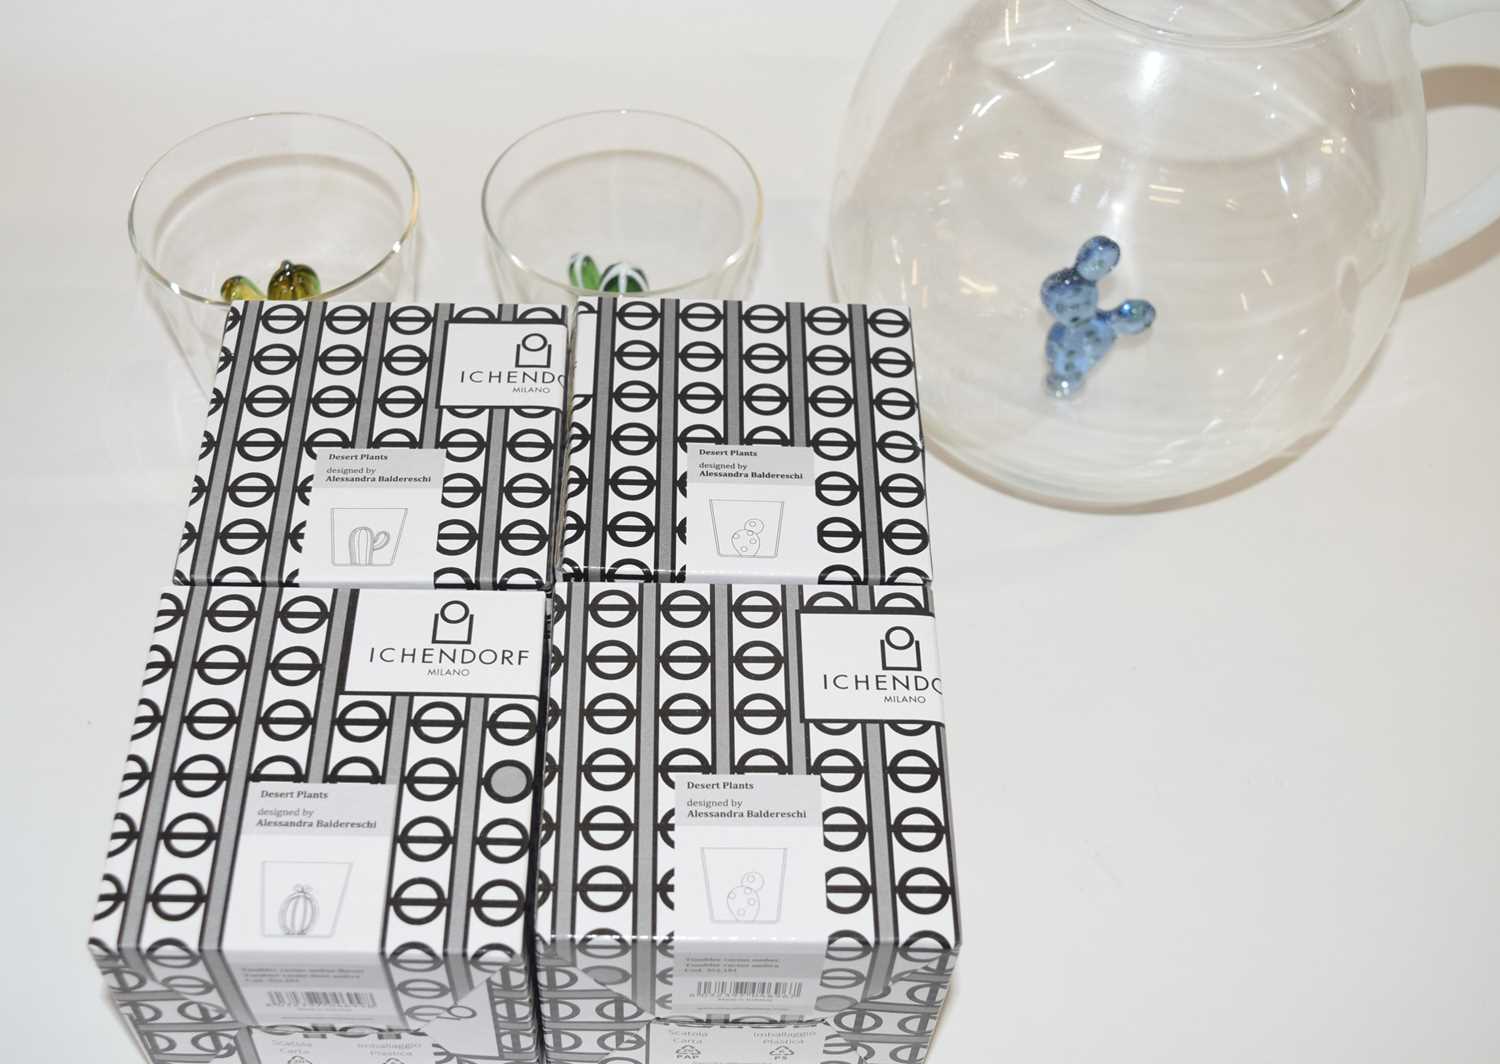 Ichendorf Milano Cactus, a set of six cactus glasses and matching jug, all boxed with labels and - Image 2 of 2